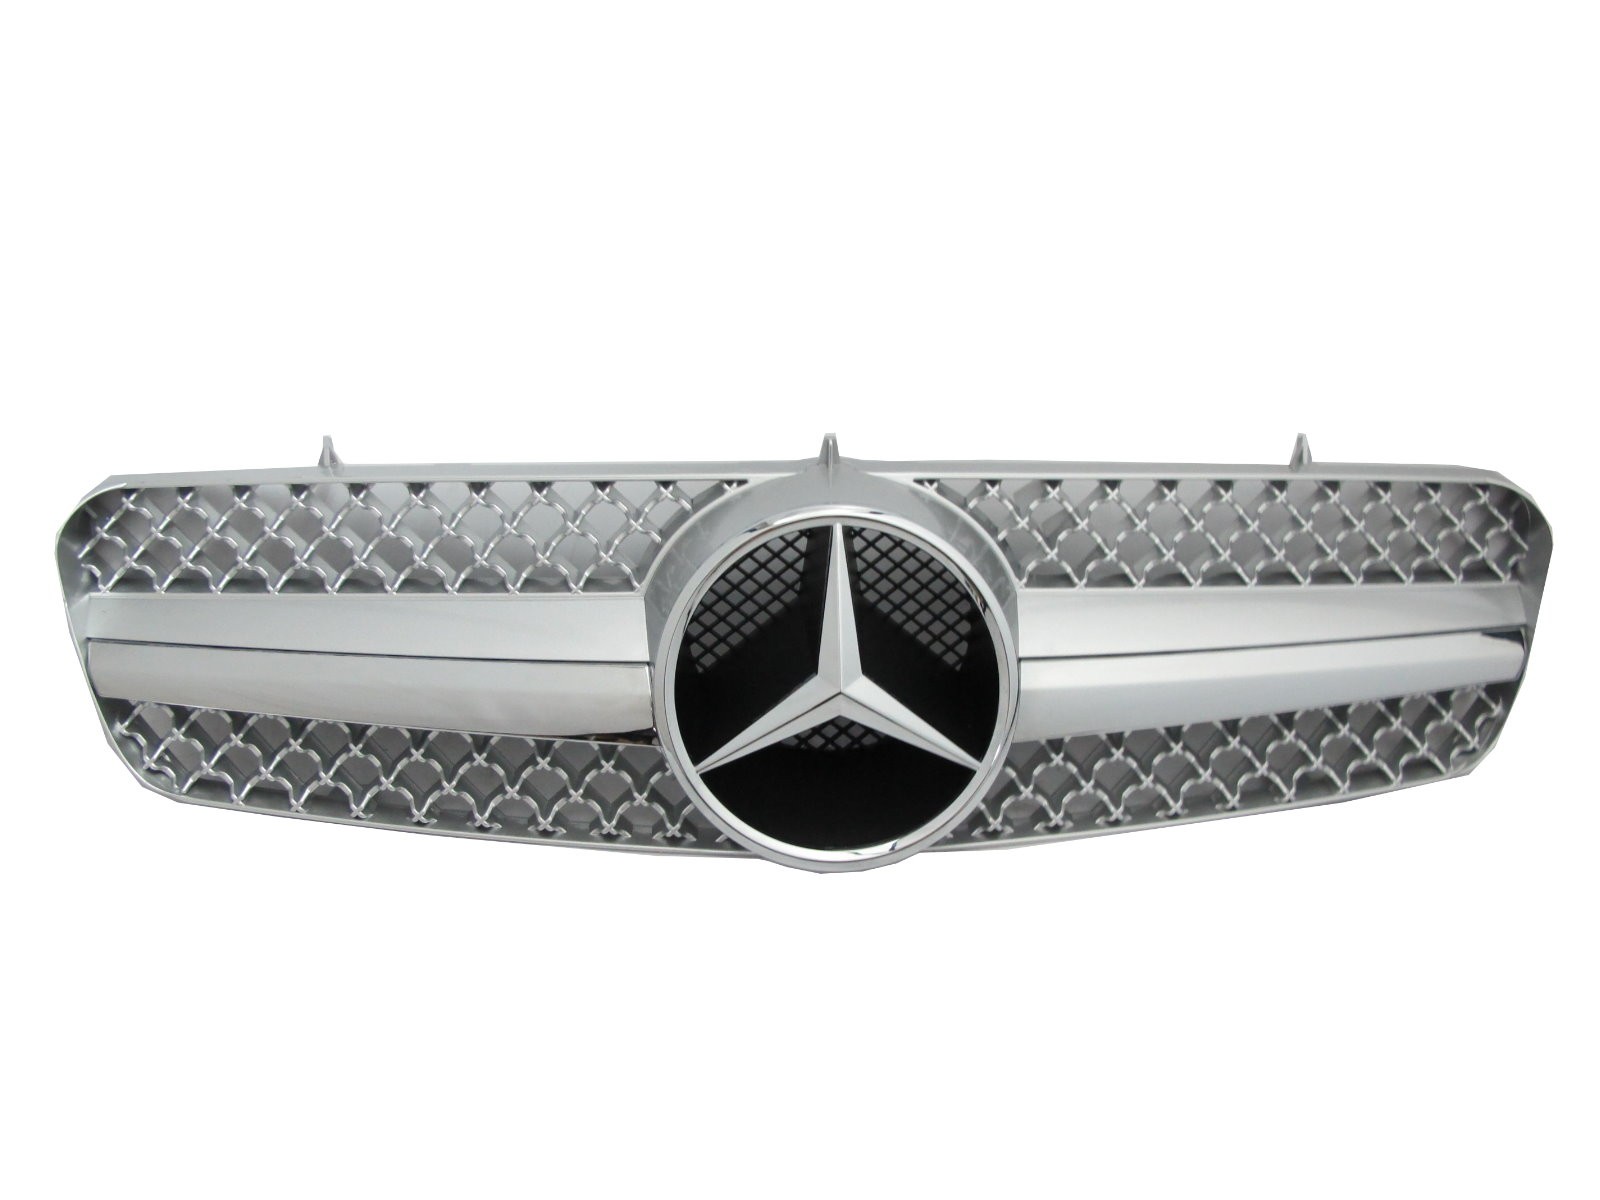 CrazyTheGod CL-CLASS W215/C215 2000-2005 Coupe 2D 1FIN GRILLE/GRILL Chrome/Silver V2 for Mercedes-Benz